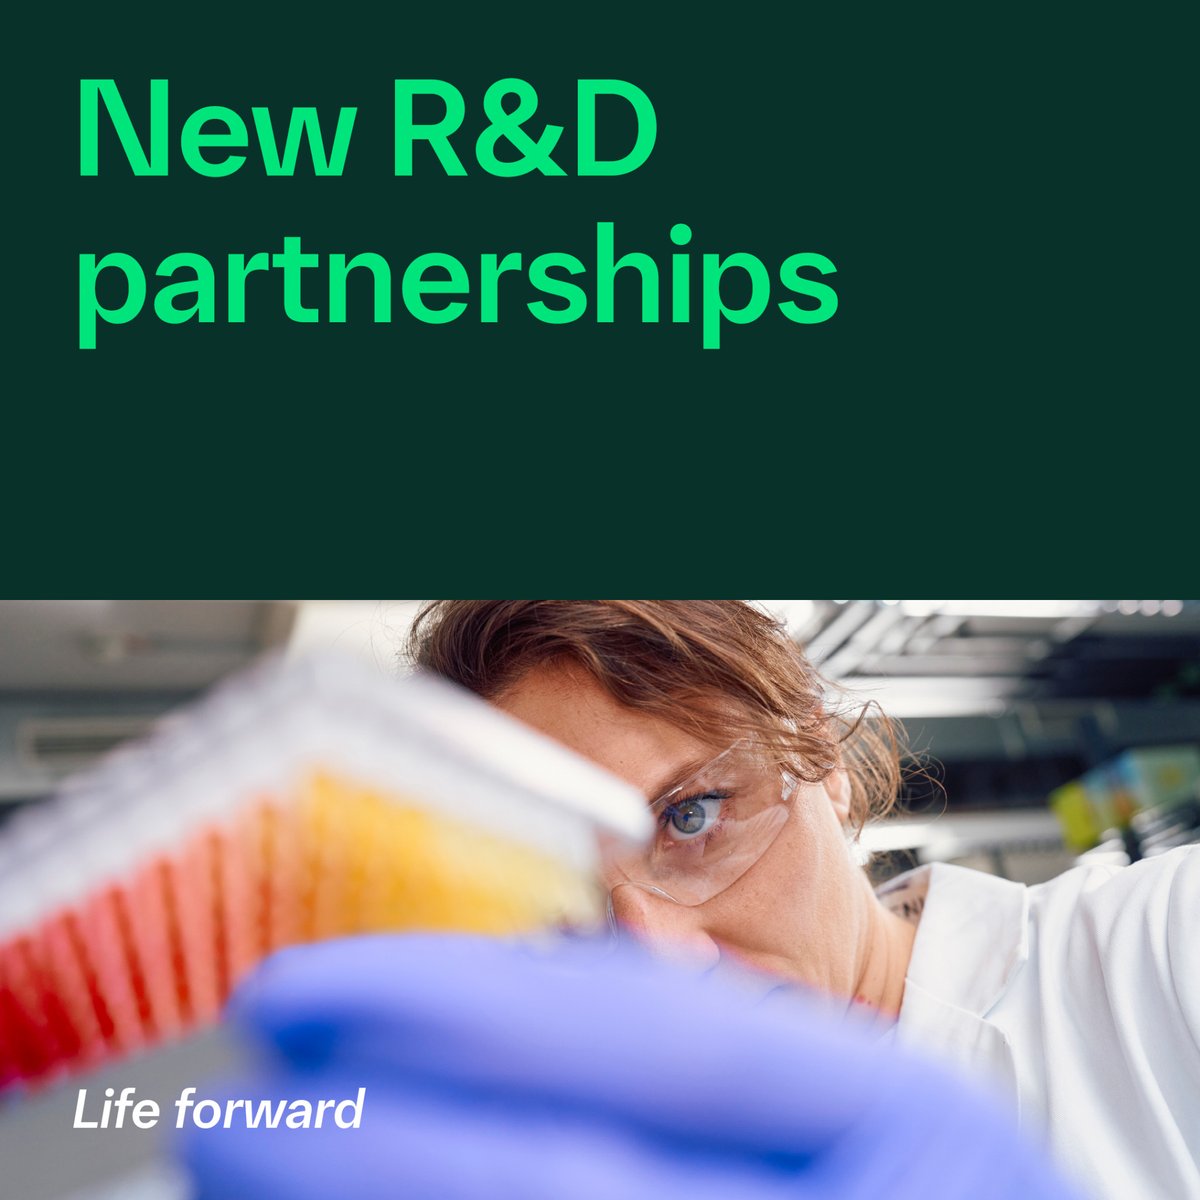 #NEWS: We have entered into five new R&D partnerships this year already. Looking forward to working with our new partners and to entering into more R&D partnerships in 2024. Learn more: bit.ly/41SWlbH #Innovation #ResearchCollaboration